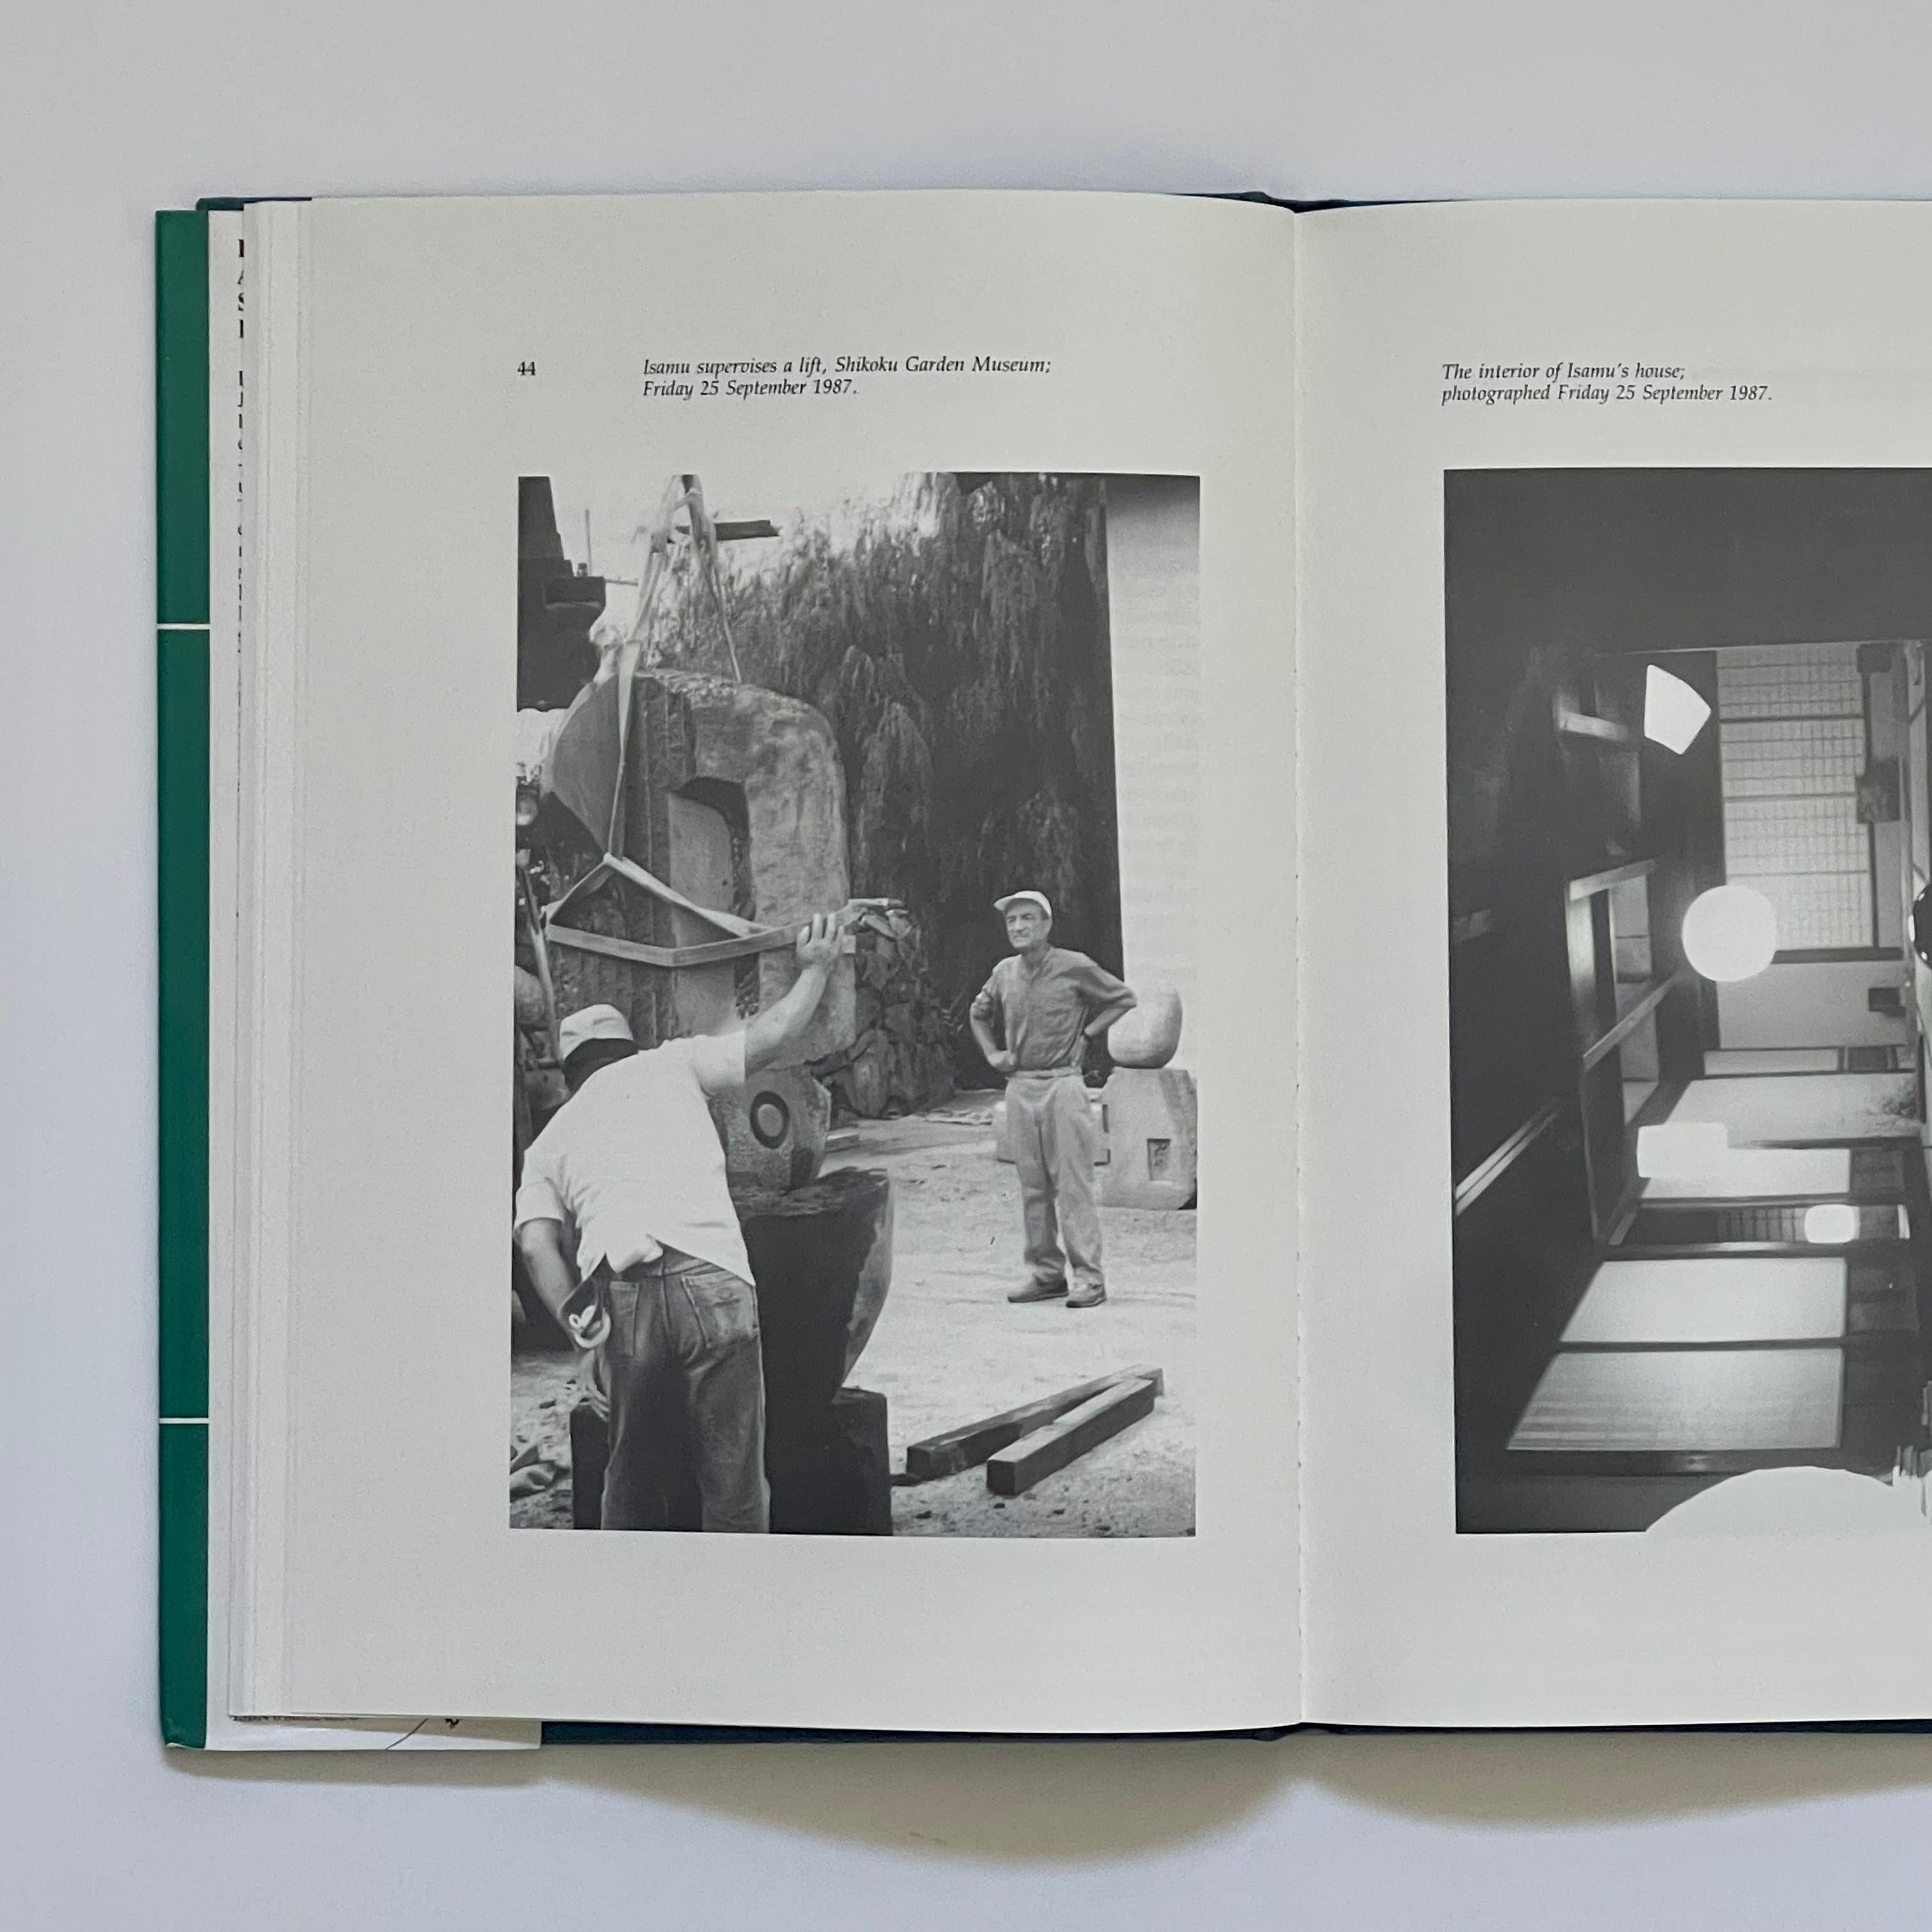 First Edition, published by Seagull Books, Sussex, England 1992.

A survey of Isamu Noguchi's practice by celebrated sculptor Tim Threlfall, who explores some of the elements - such as collaboration, the environment and humanism - that are crucial